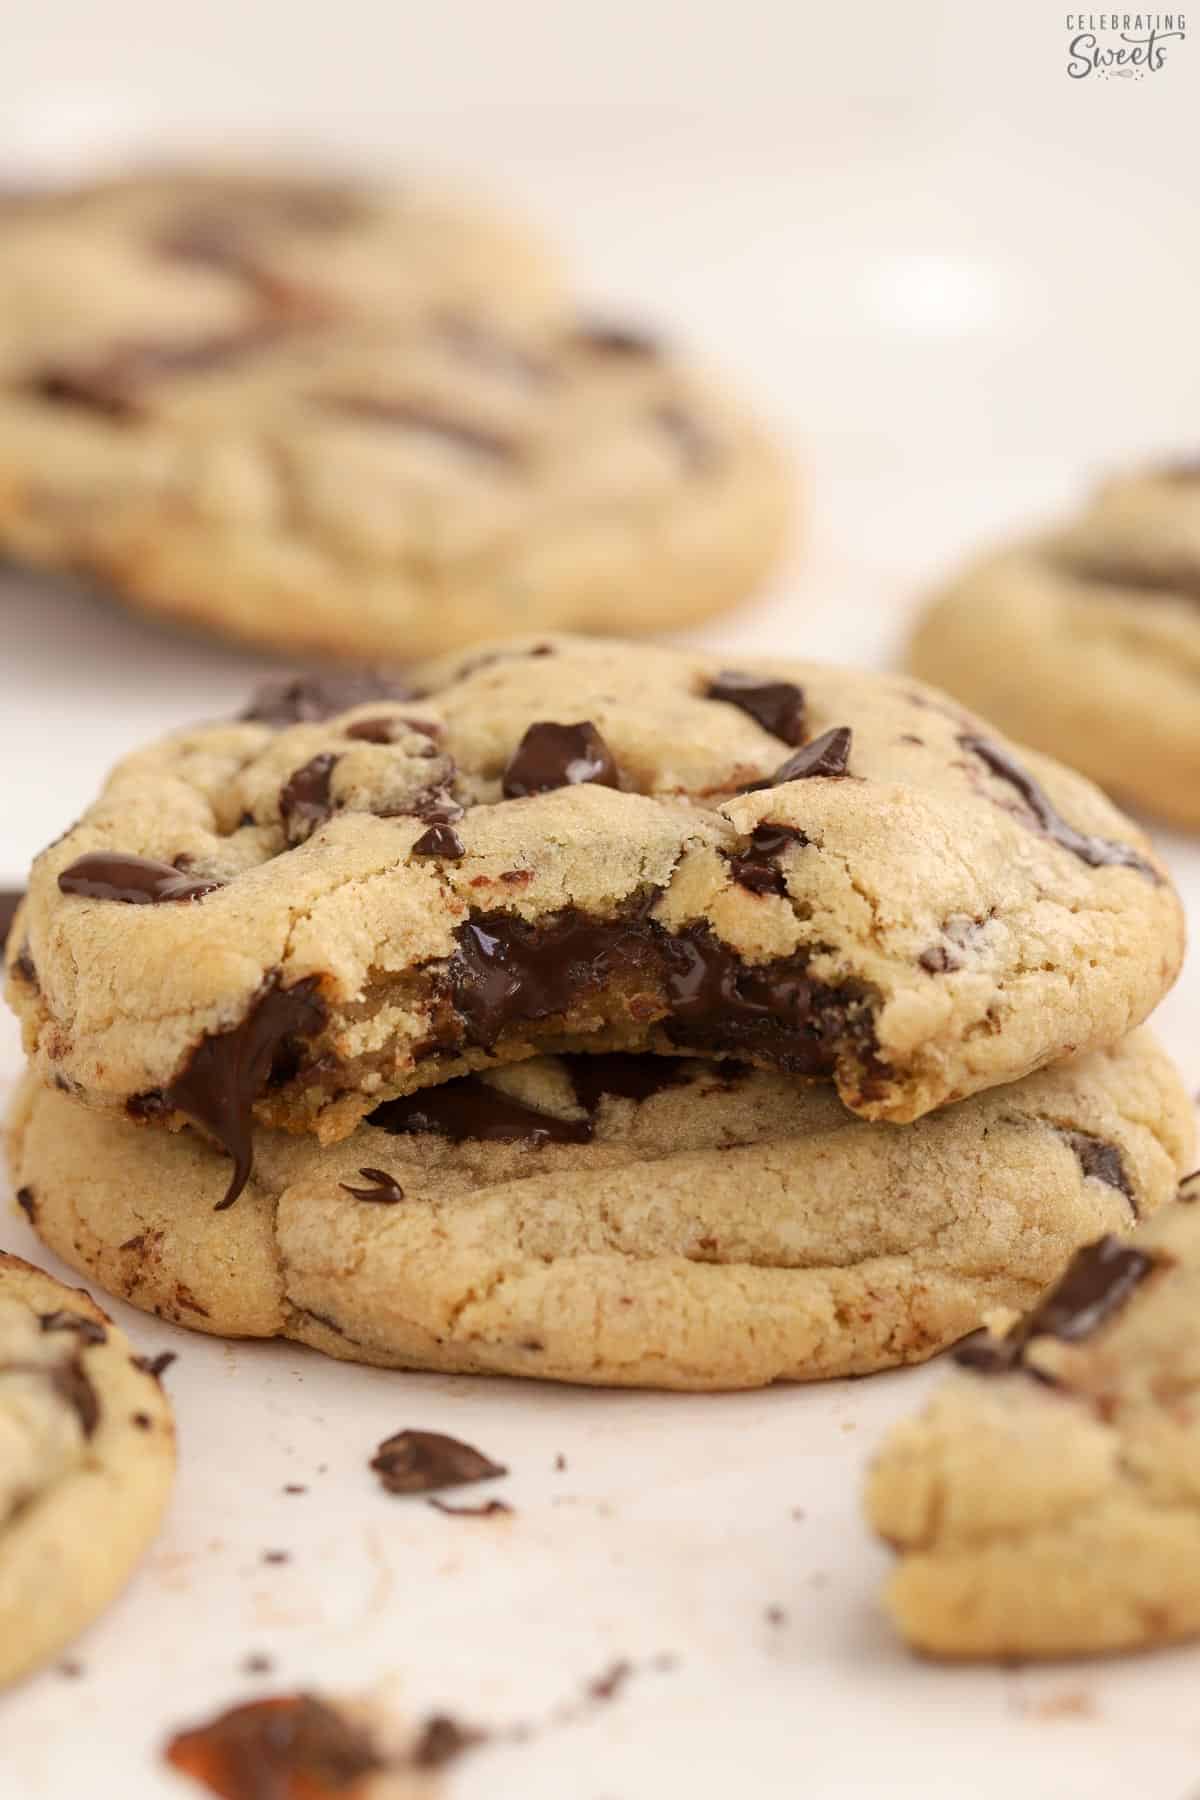 Chocolate chip cookies with a bite taken out of it.